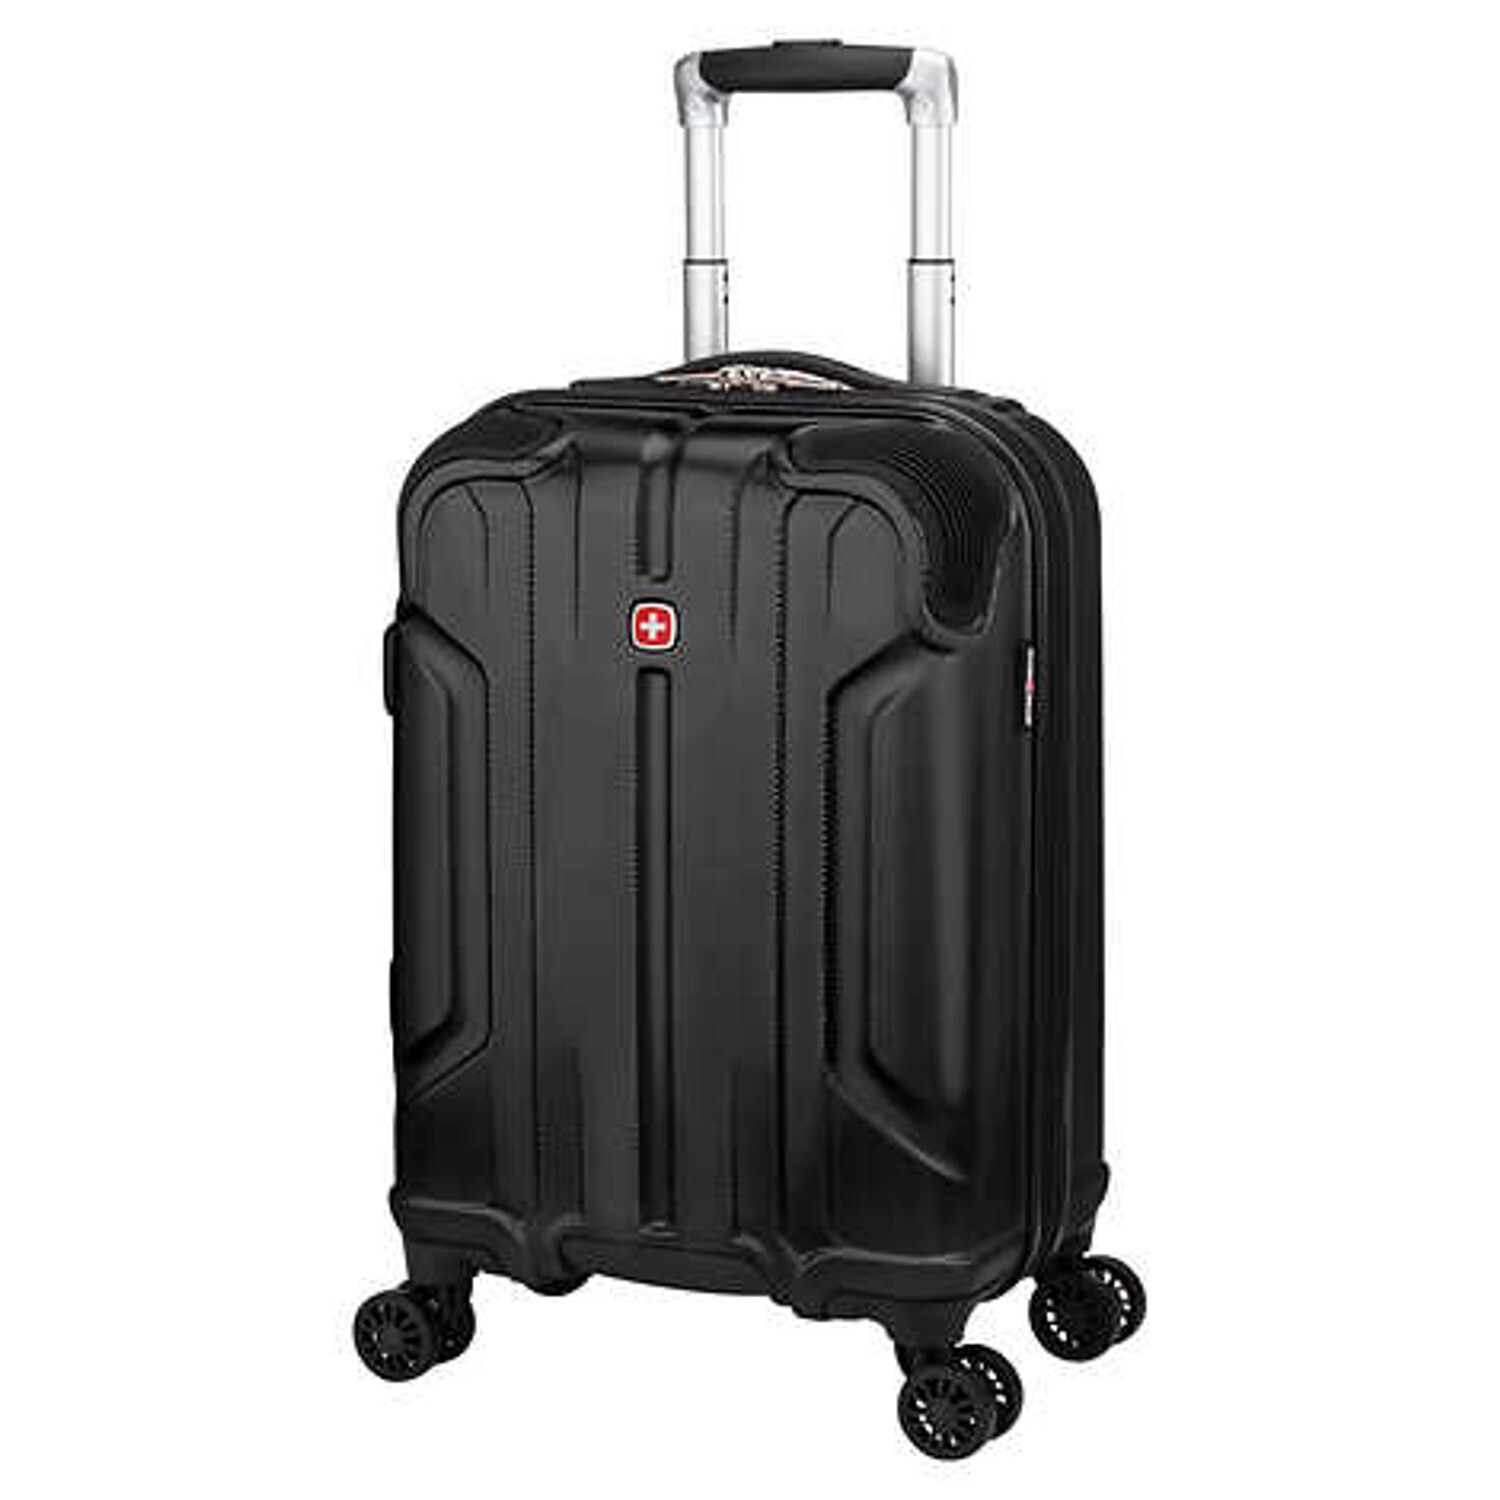 Swissgear Nadius Hardside Carry-On with 2 Packing Cubes(U)